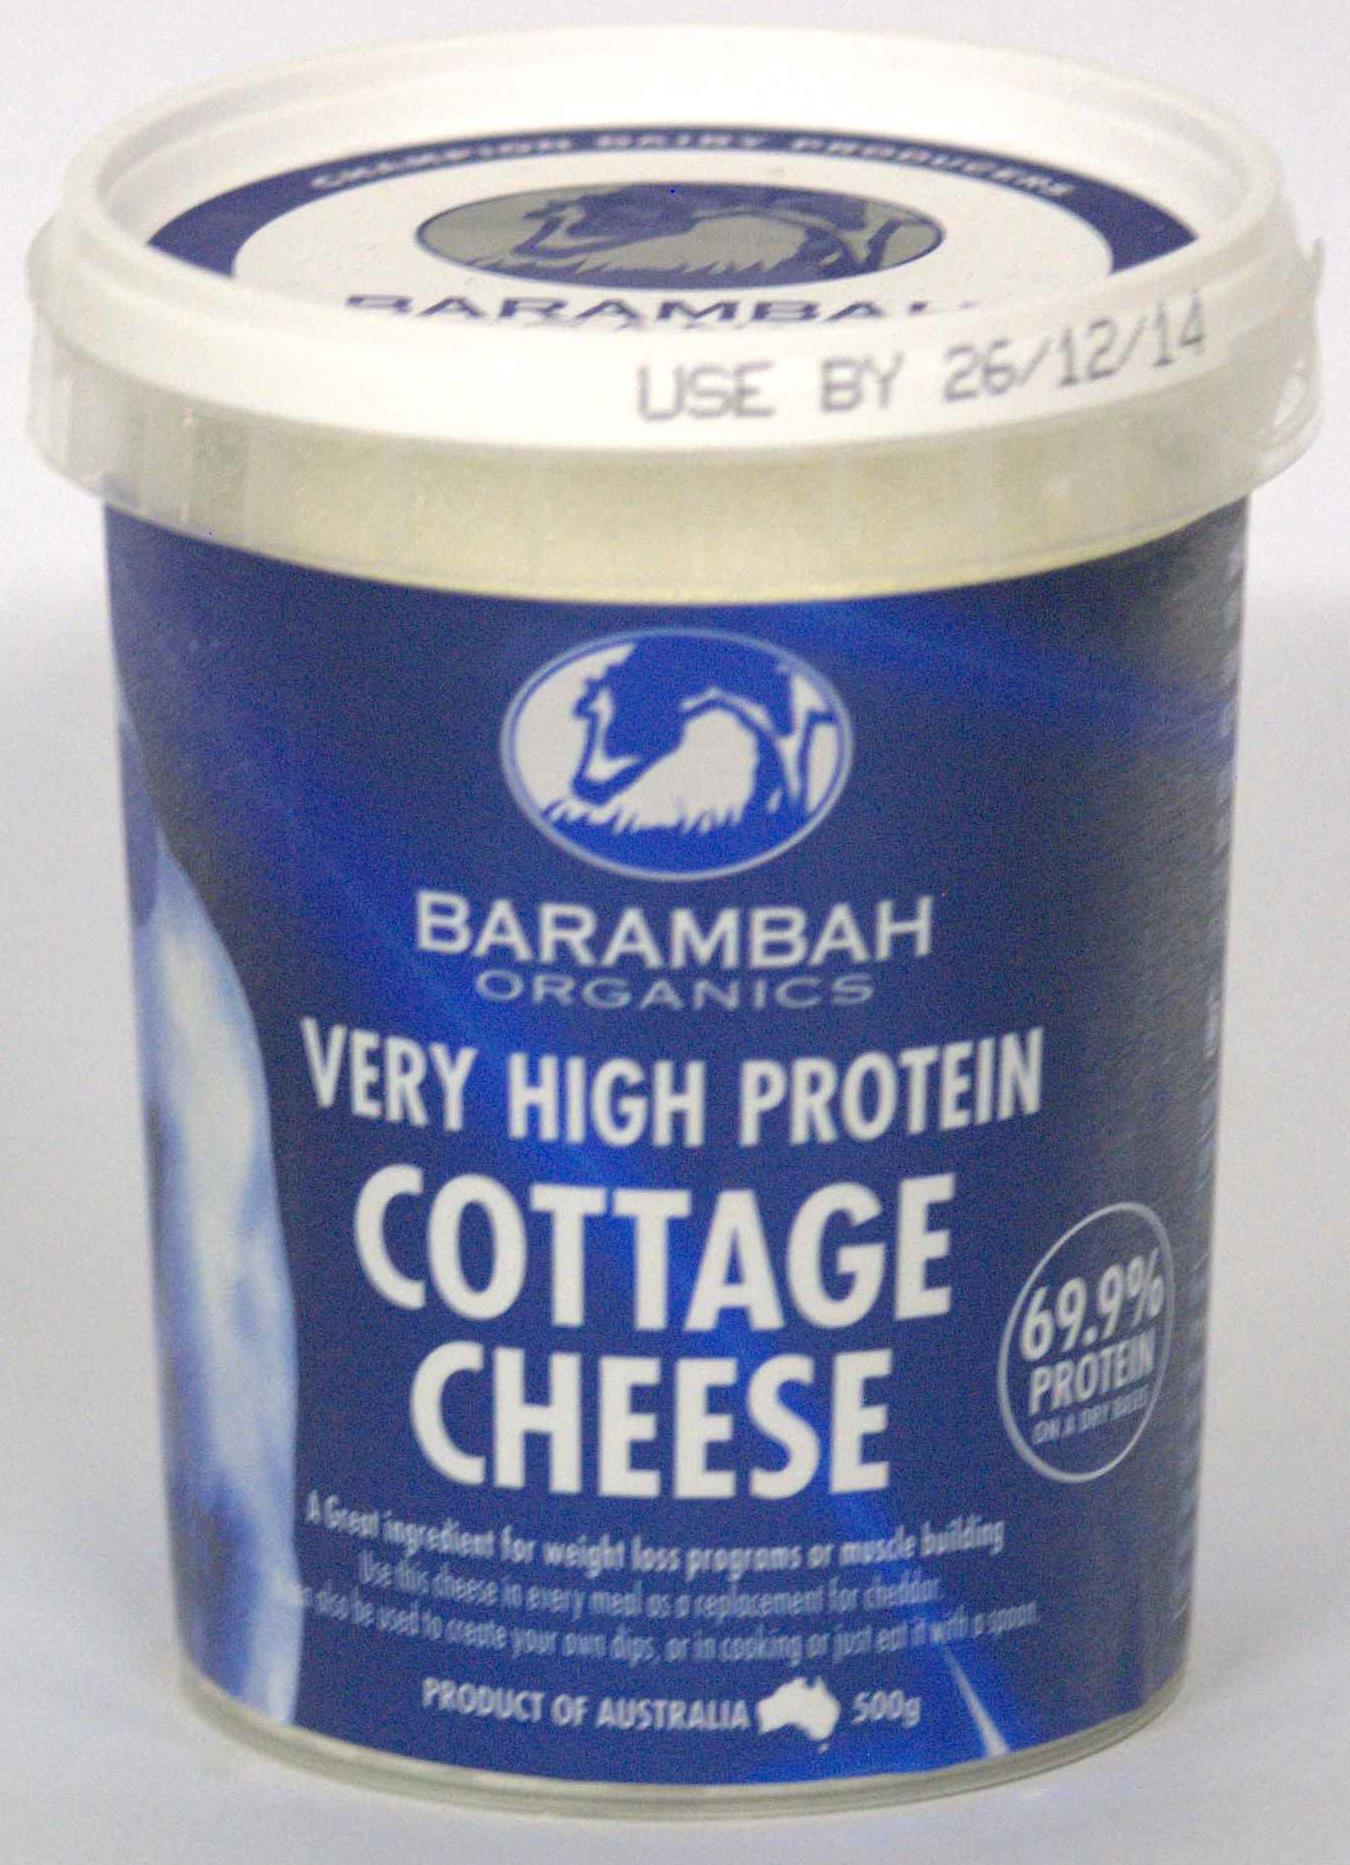 Barmbah Cottage Cheese